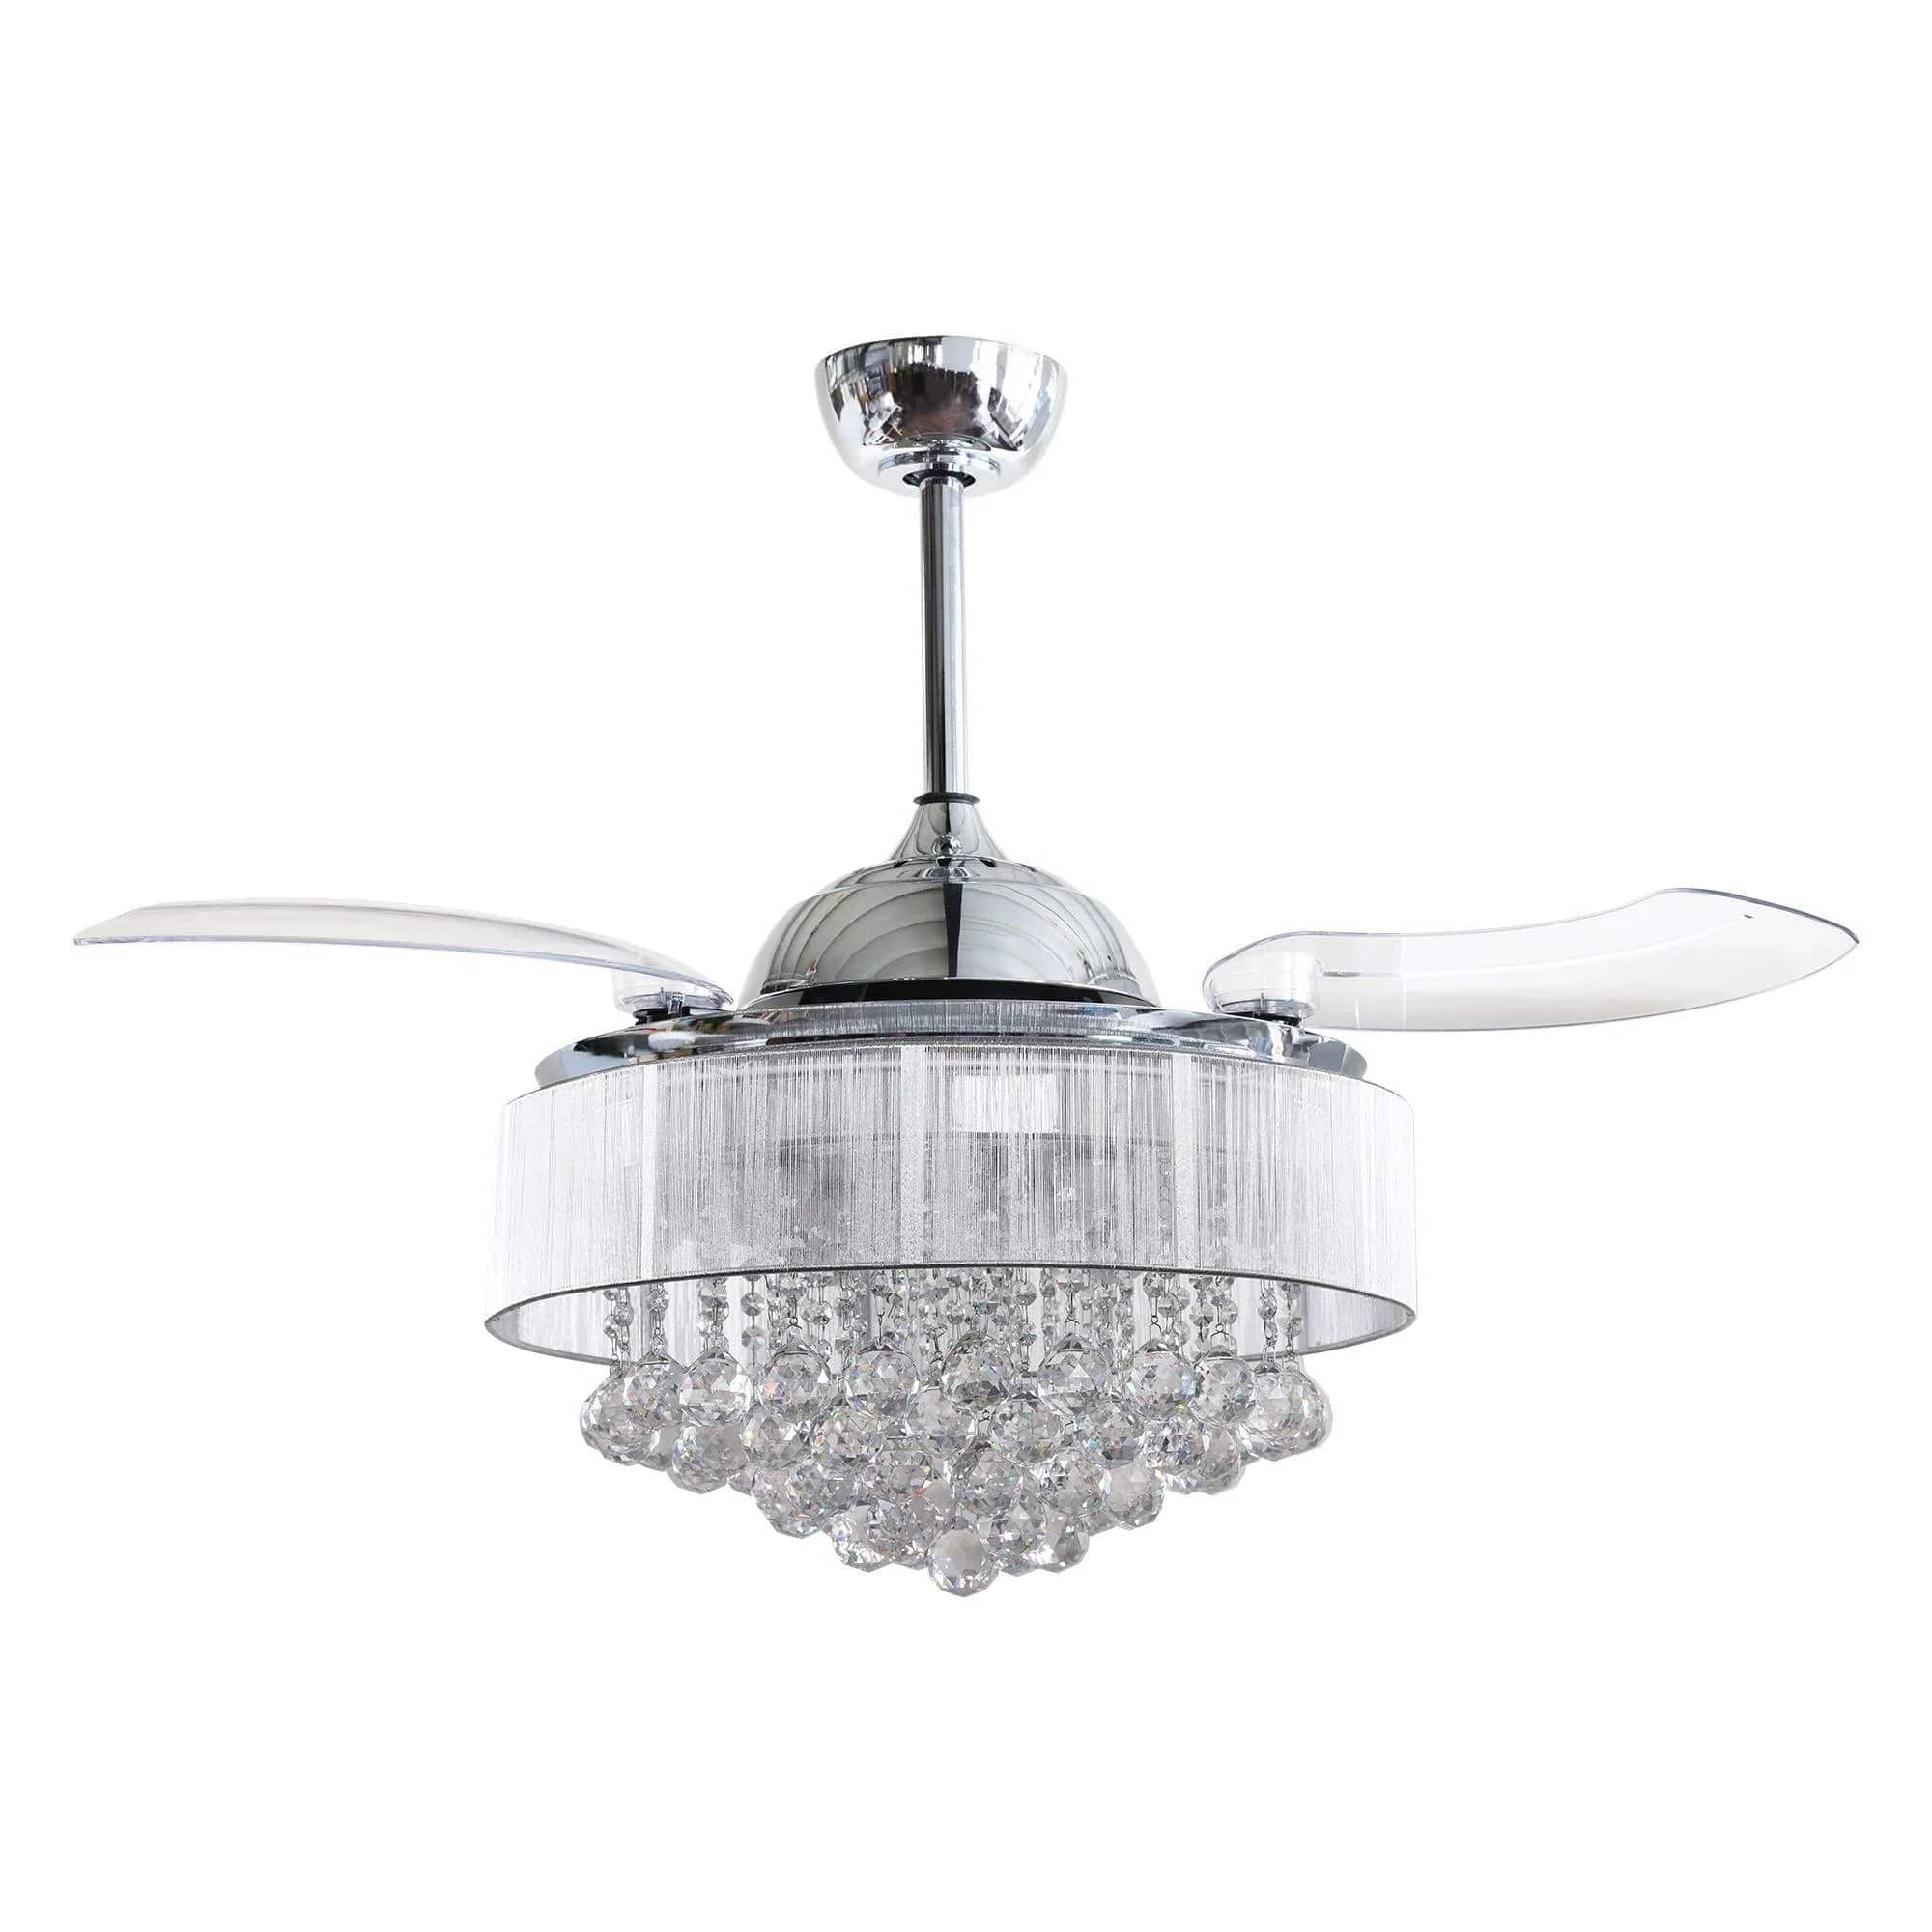 Parrot Uncle Parrot Uncle 42 In. Broxburne Modern Crystal Ceiling Fan with Lighting and Remote Control Ceiling Fan F4501110V